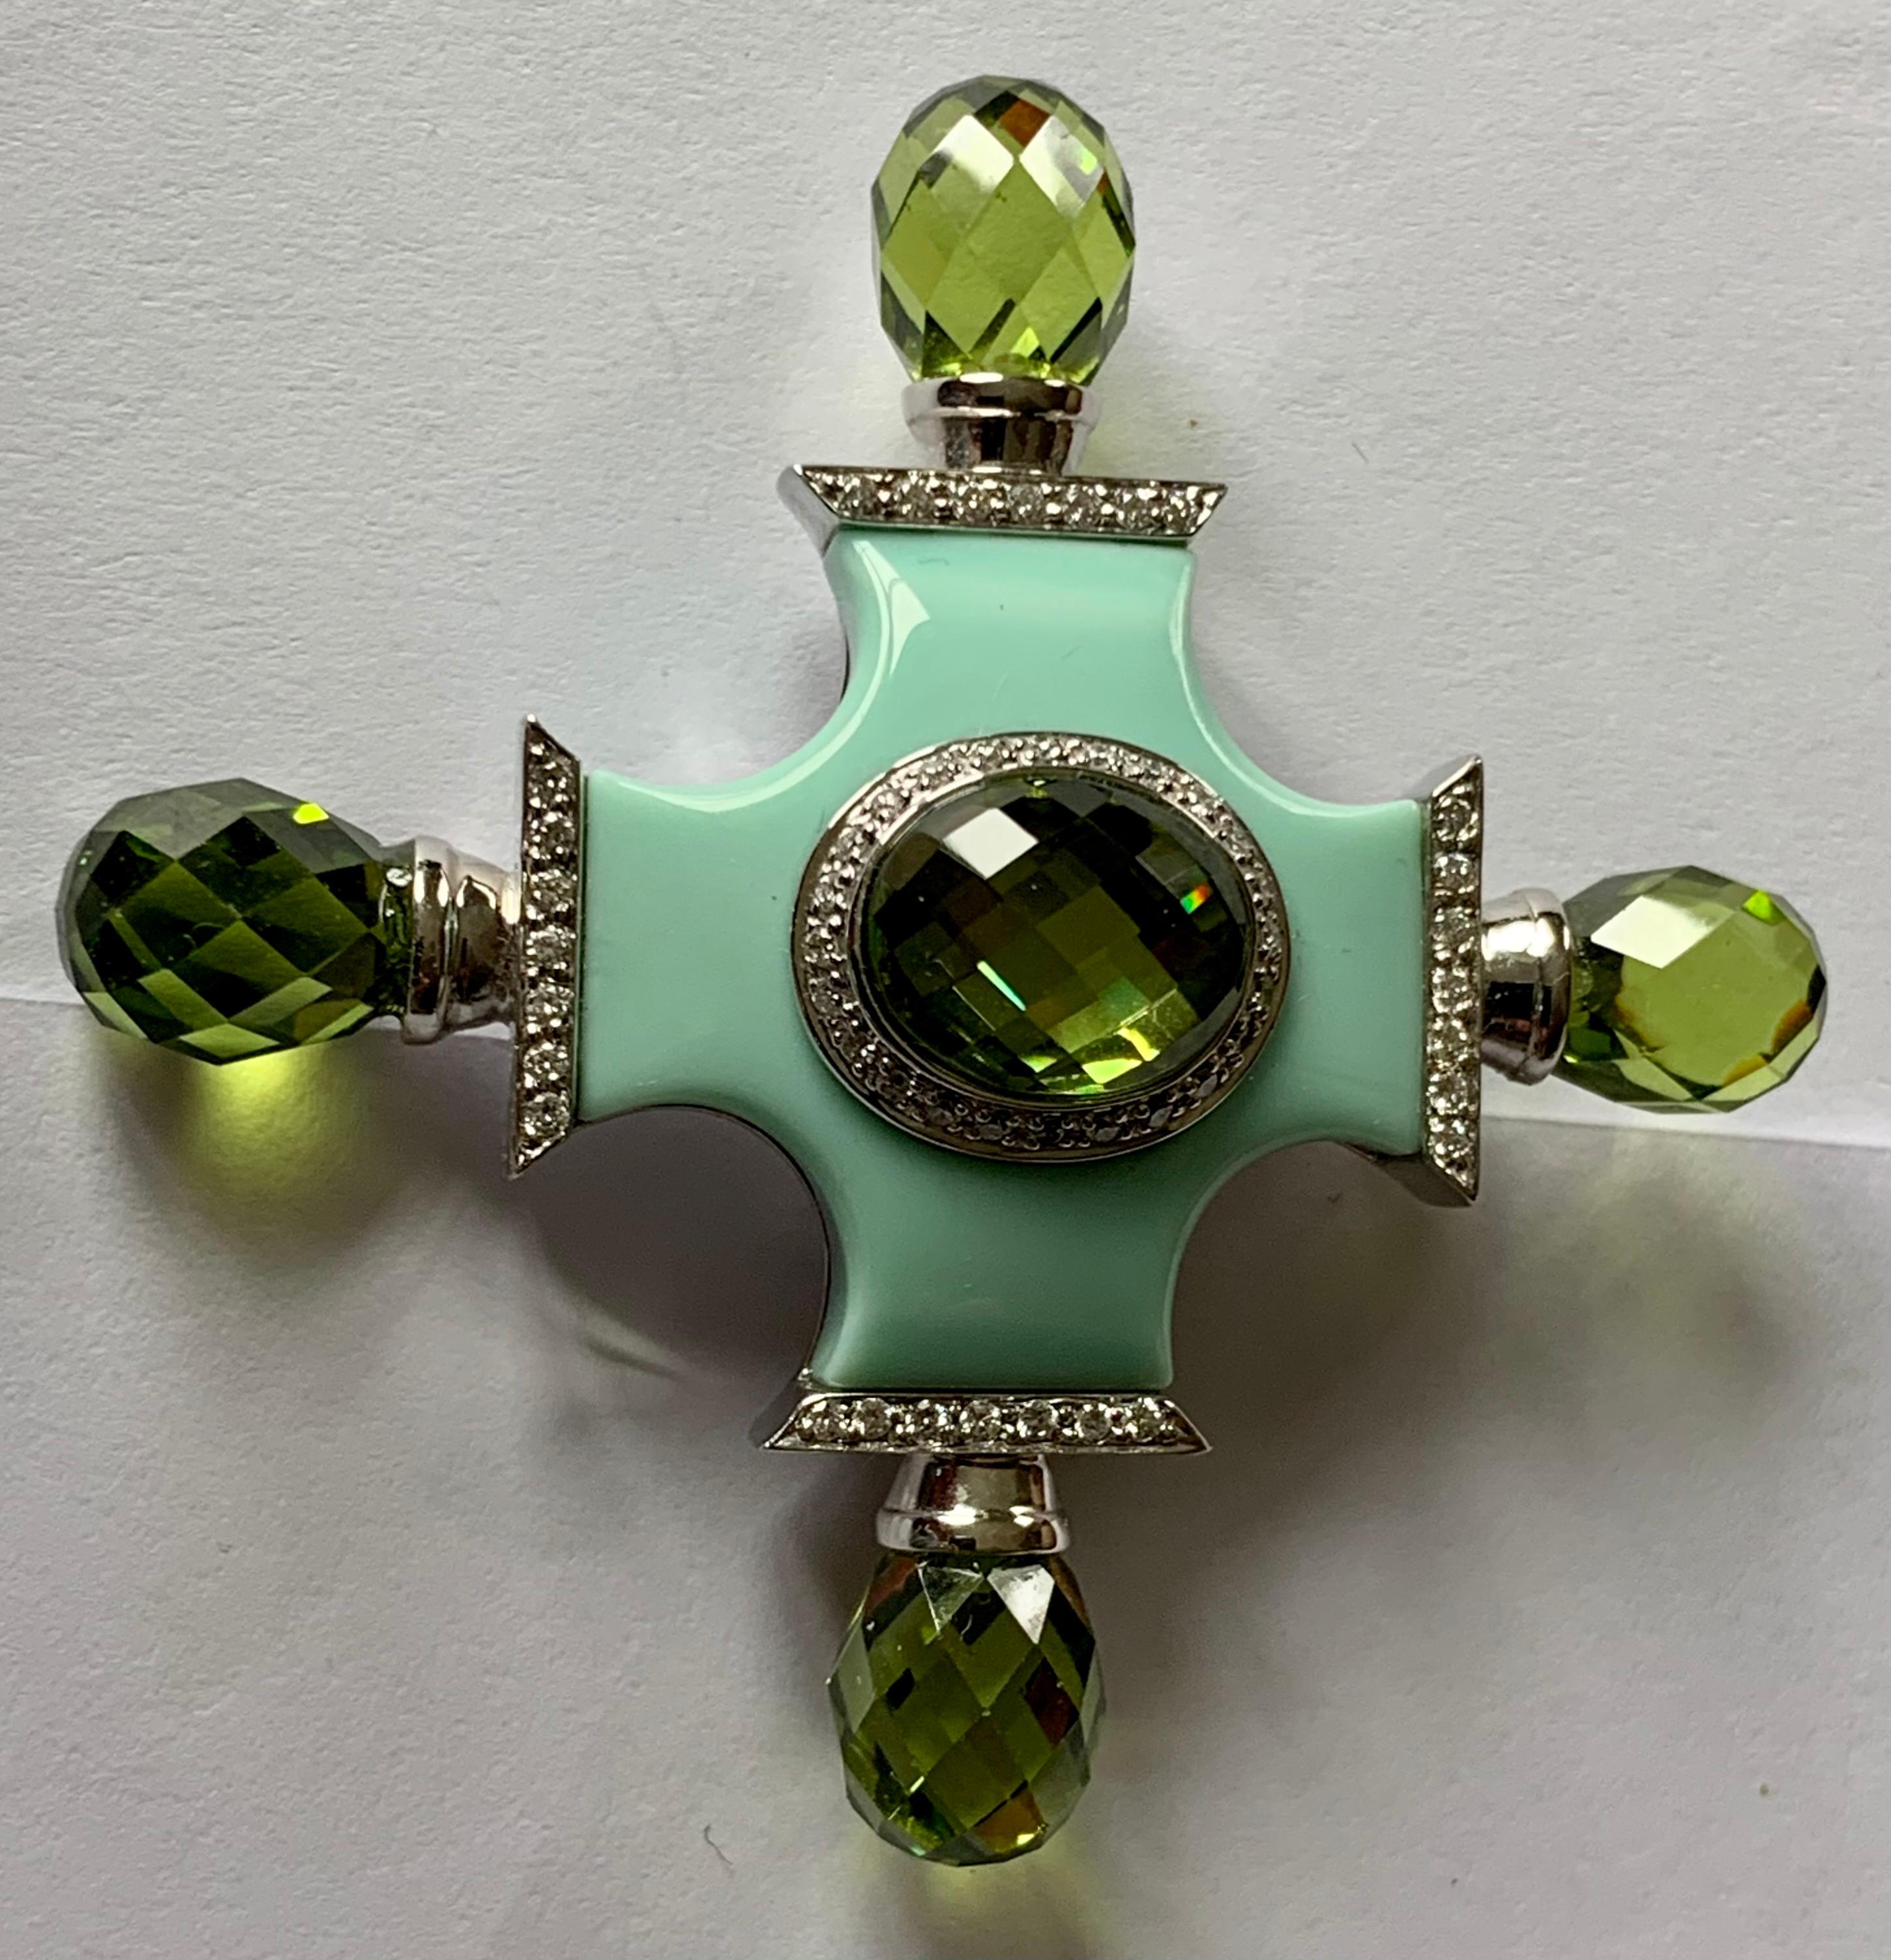 An 18 Karat white Gold and Diamond Maltese Cross Pendant/Brooch. The main part of the brooch/pendant is a light turquoise colored ceramic body. The piece is set with Diamonds weighing 0.42 ct and green Quartz in Briolette cut.
A truly beautiful